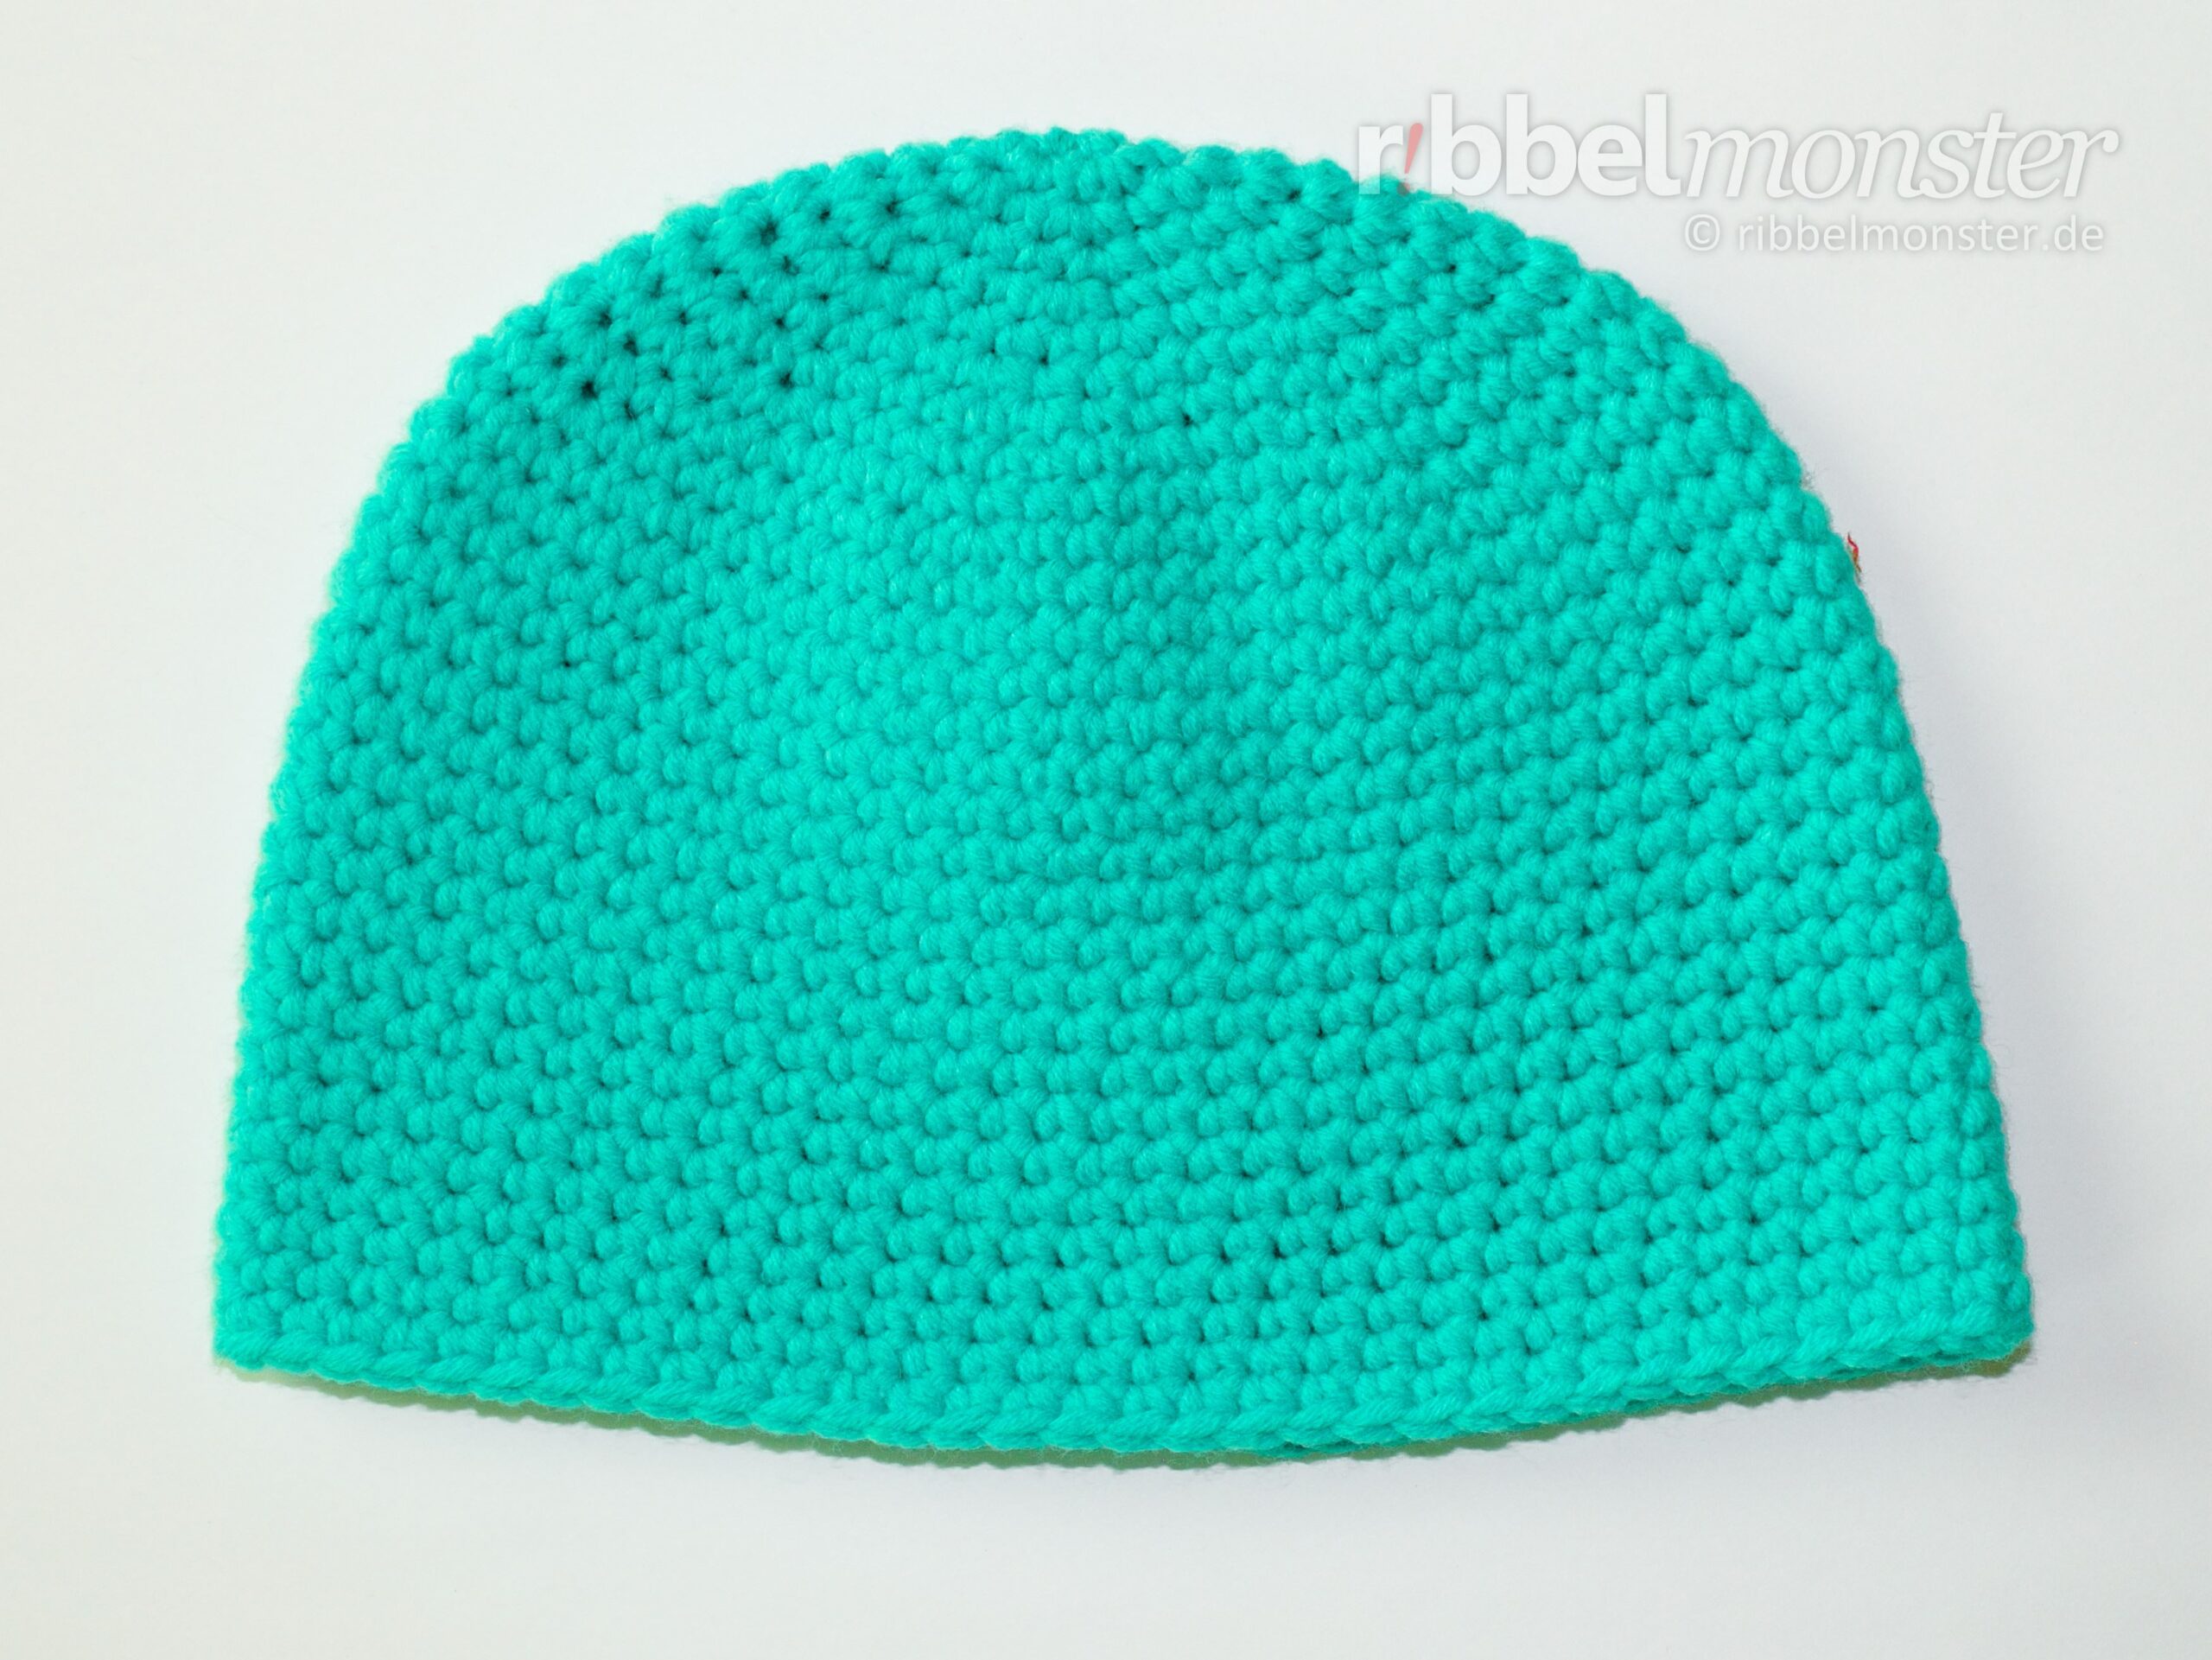 Crochet Hat – Beanie with Single Crochet Stitches in Spiral Rounds